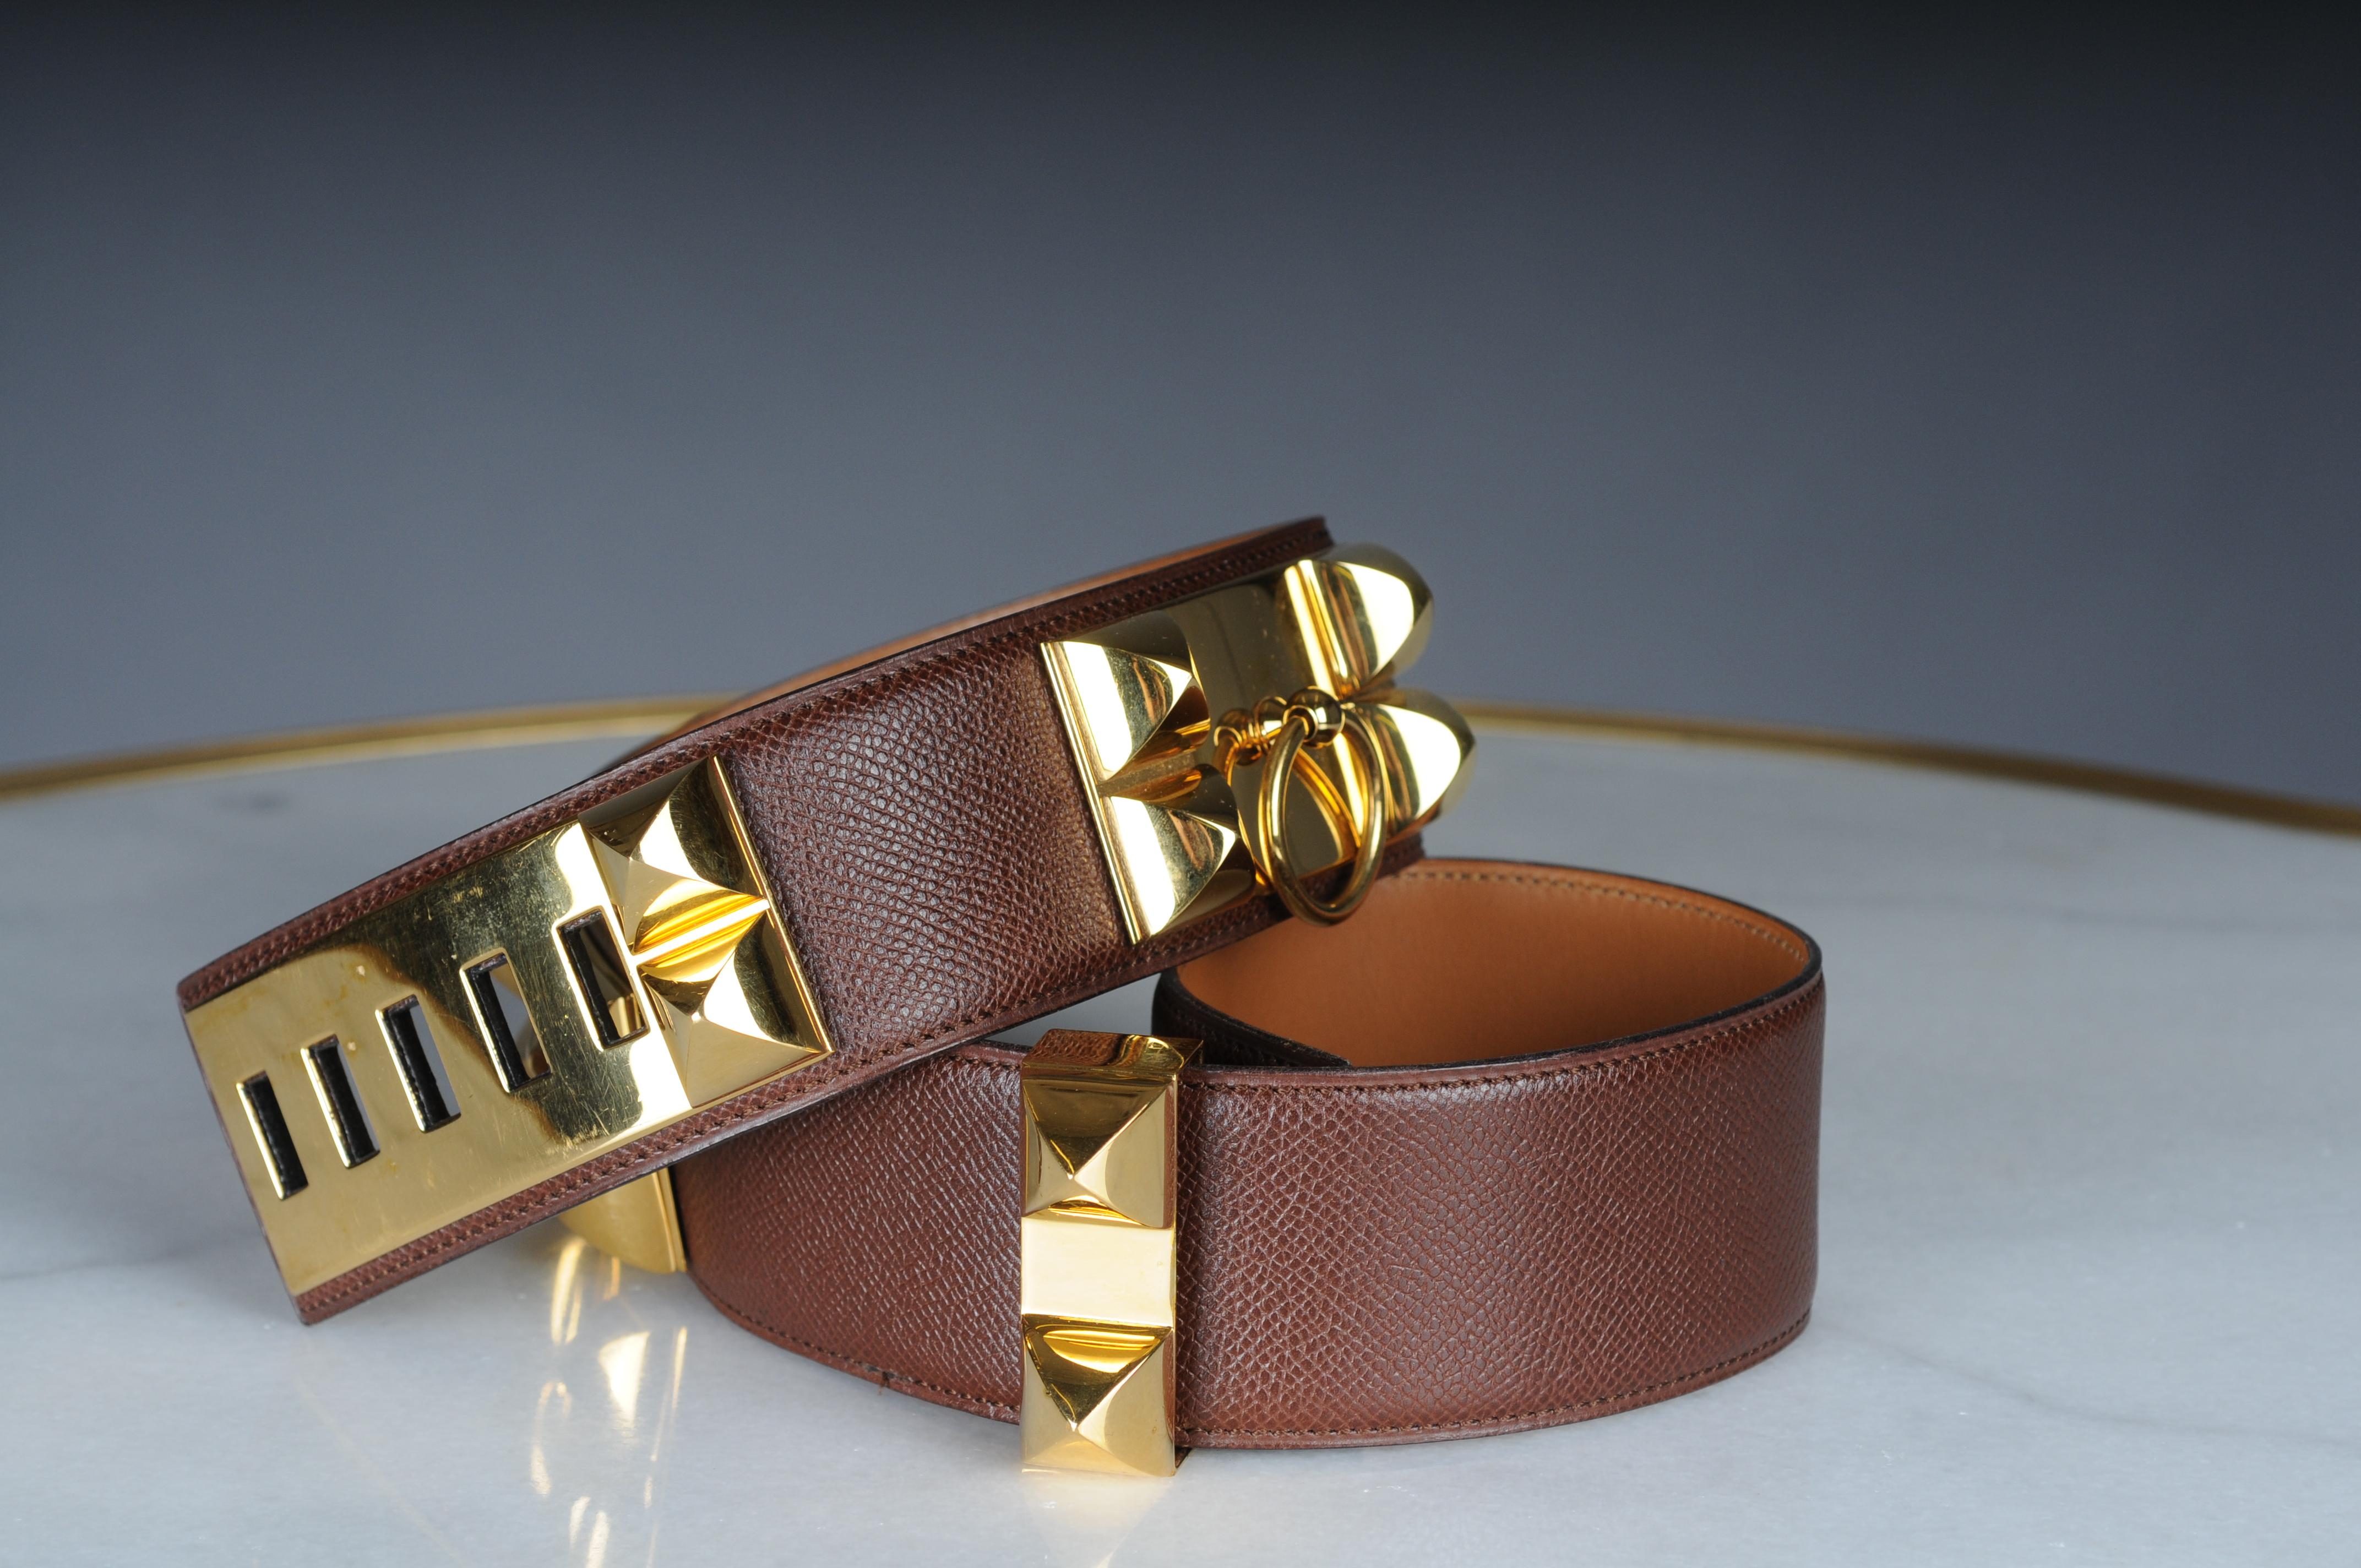 Beautiful vintage dog collar with belt made of gold leather from Hermès. Model: Dog Necklace Material: Leather Brown color Size 70 Gold plated metal 5 holes in total Width 4.7 cm Marks on leather Some marks on jewelry